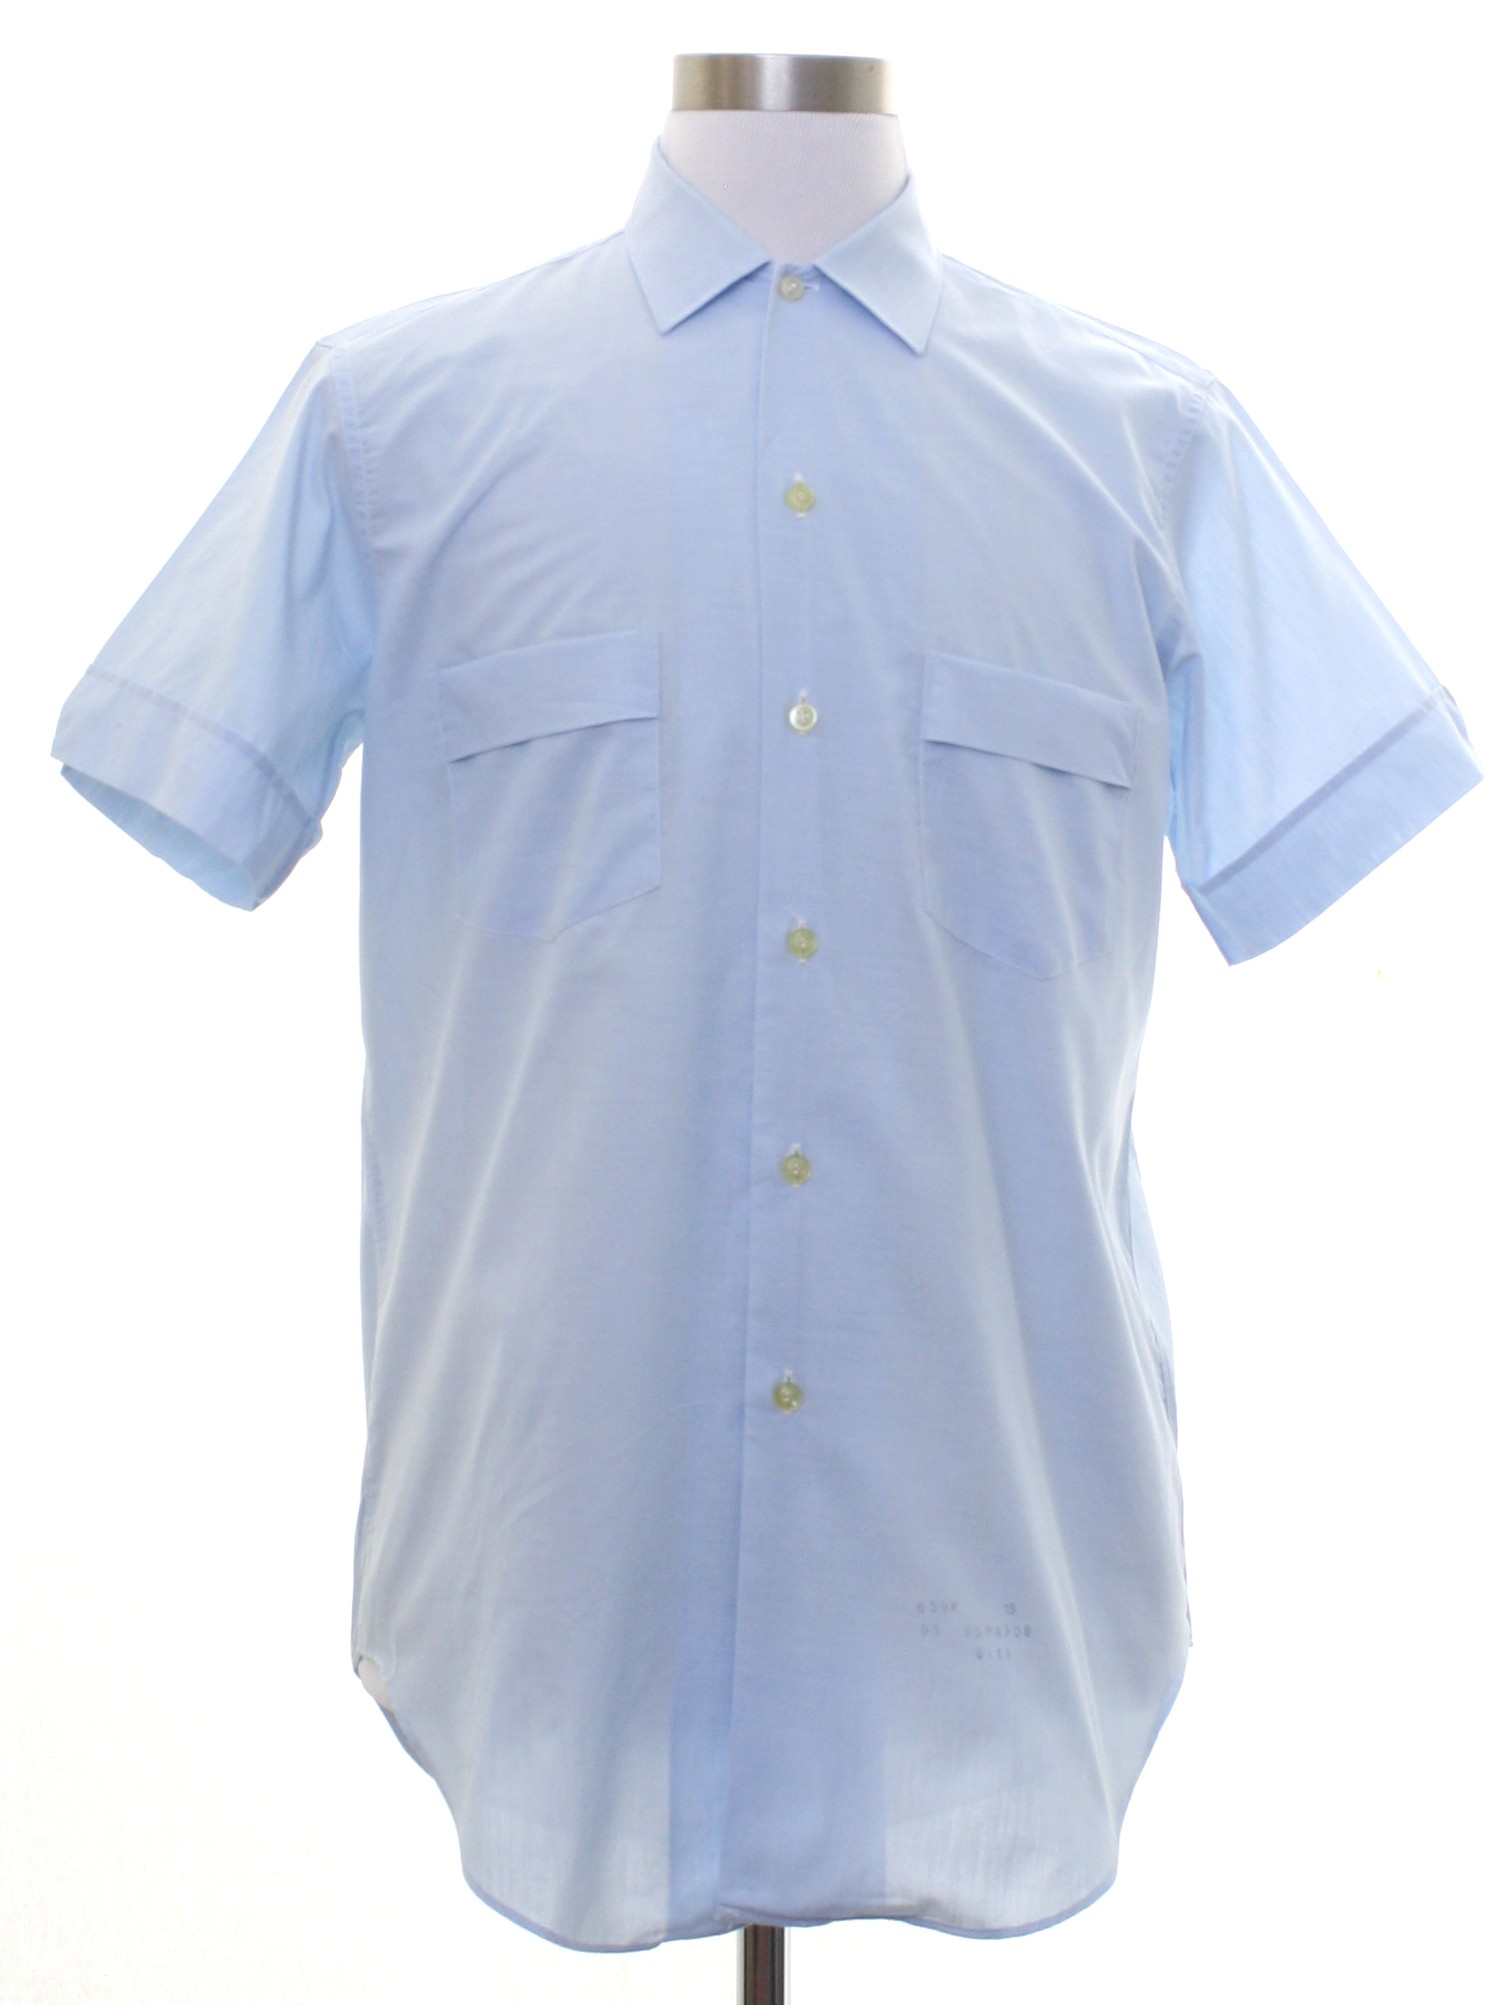 1960s National Wash and Wear Shirt: Early 60s -National Wash and Wear ...